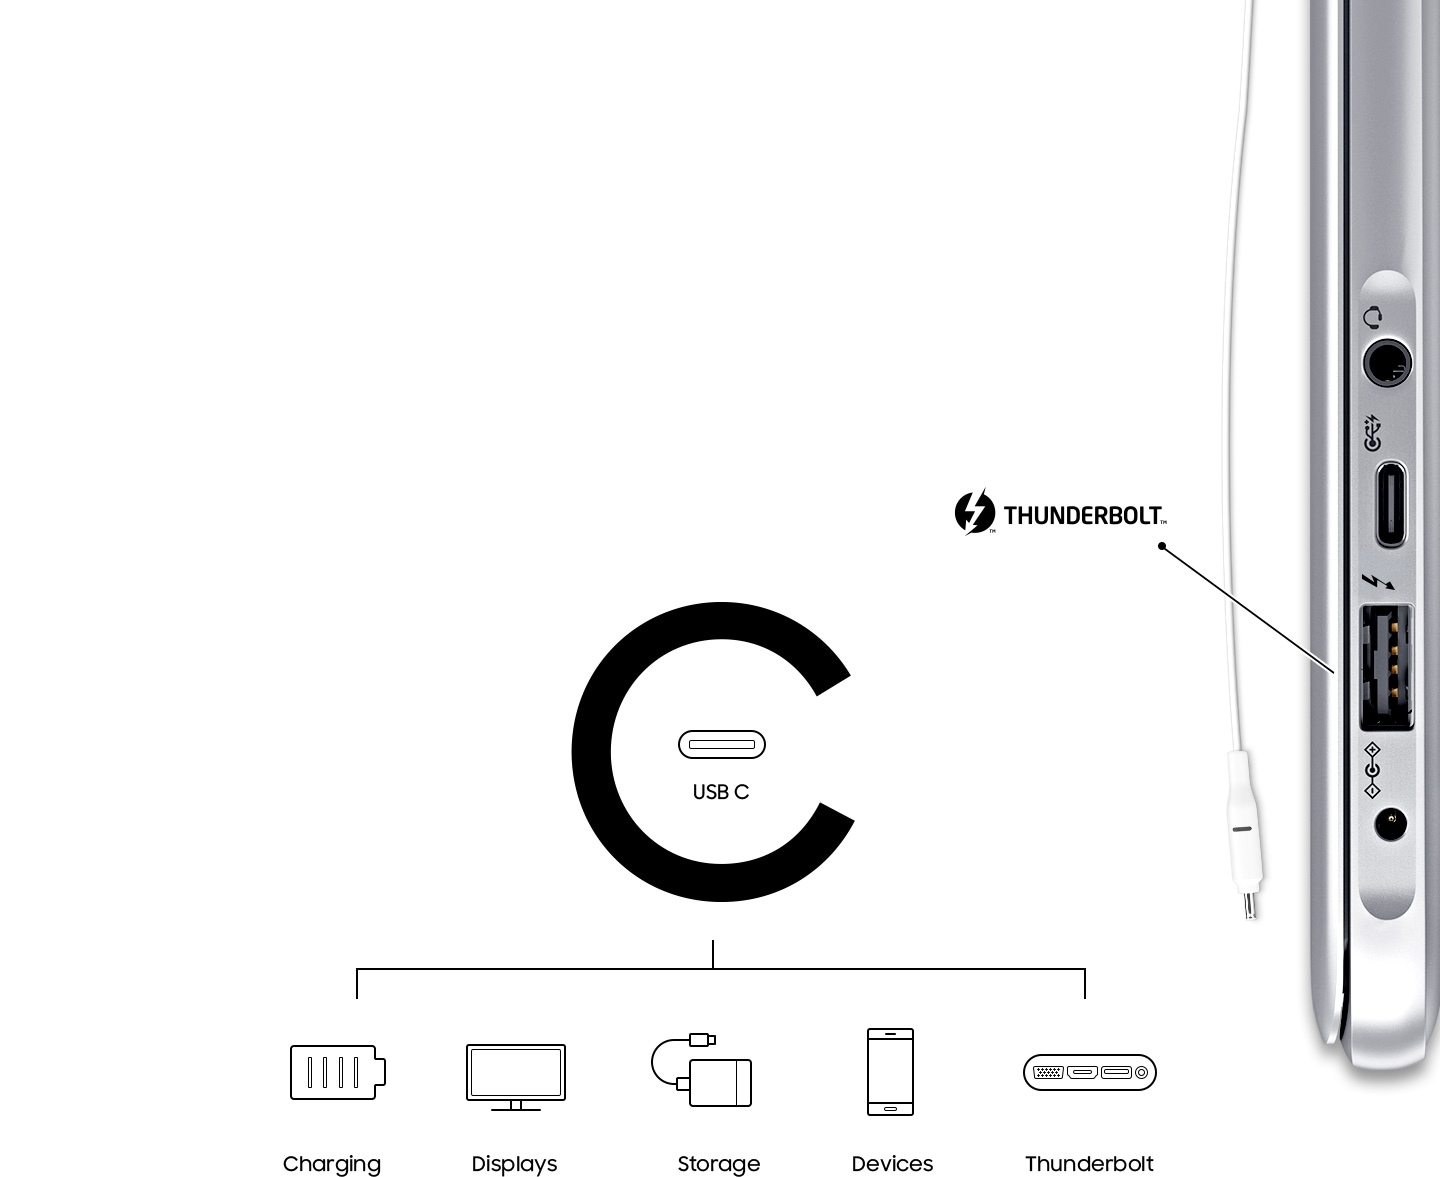 An image showing a charging cable and the Notebook 9’s side with its various ports for a USB C port and an earphones jack, as well as the Thunderbolt logo. Also, charging, displays, storage, devices, Thunderbolt icons with texts are visible.